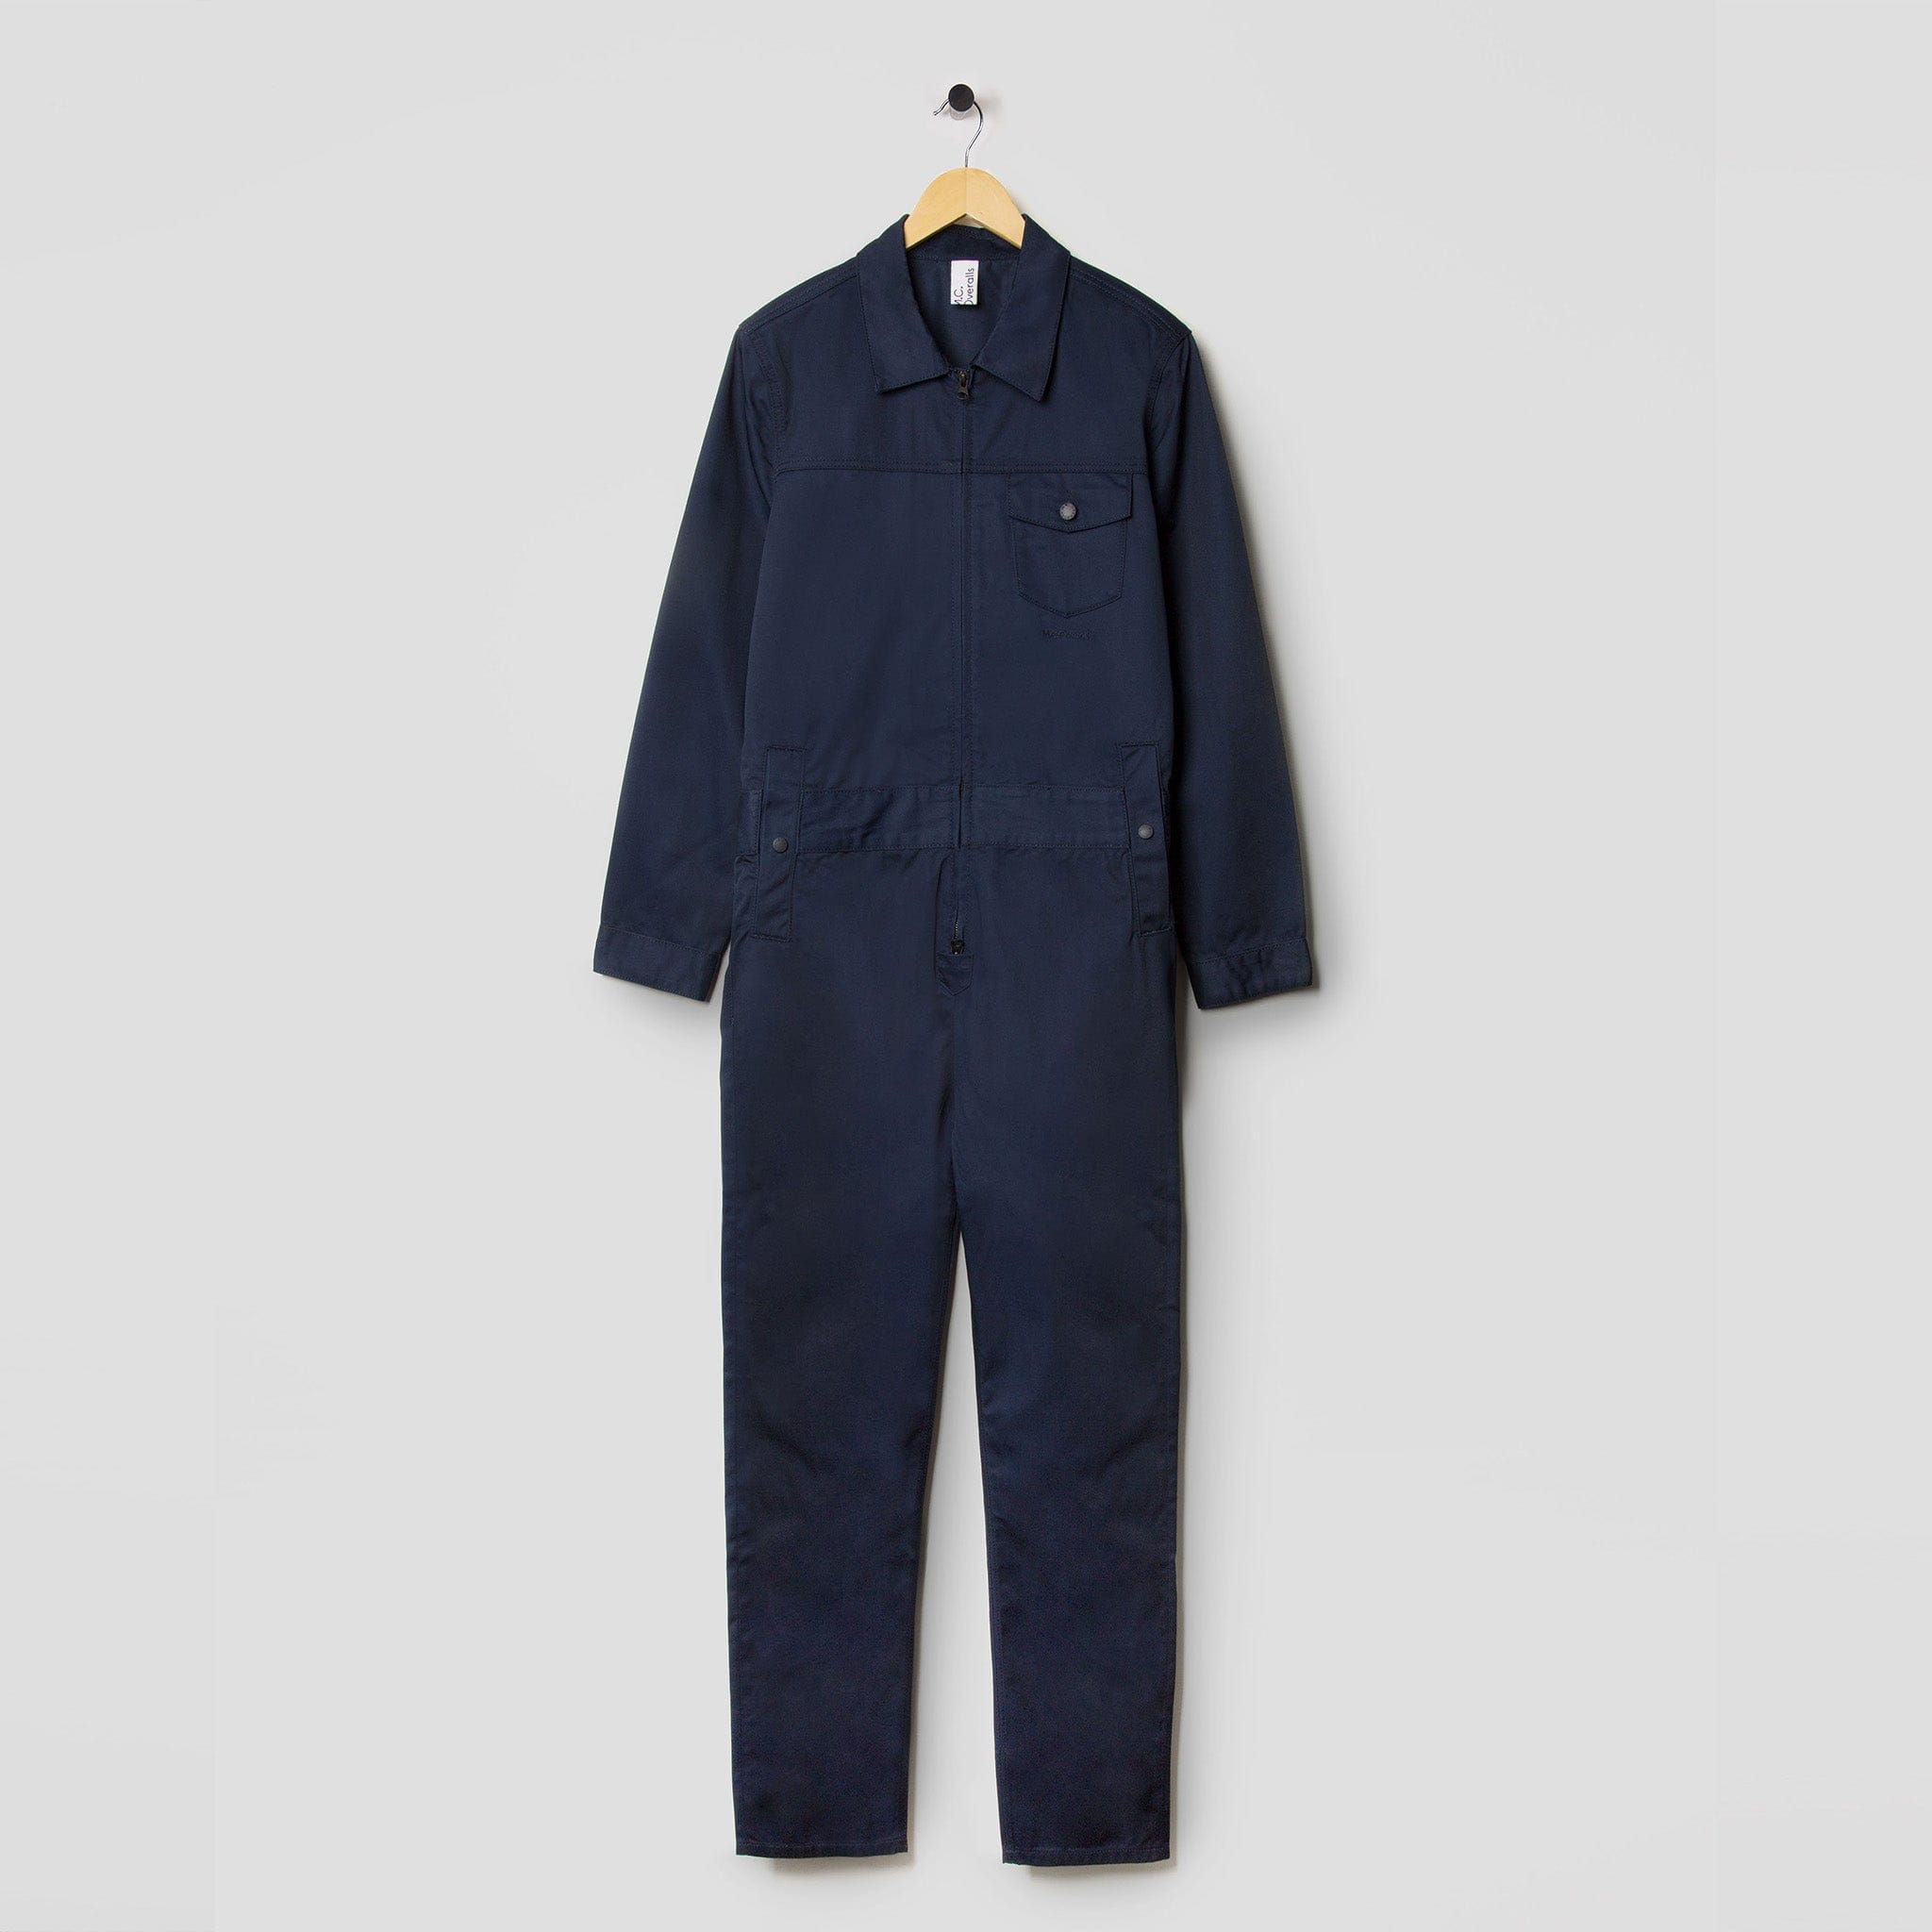 M.C.O&#39;s Polycotton Navy Blue Workwear Overalls for Men and Women.